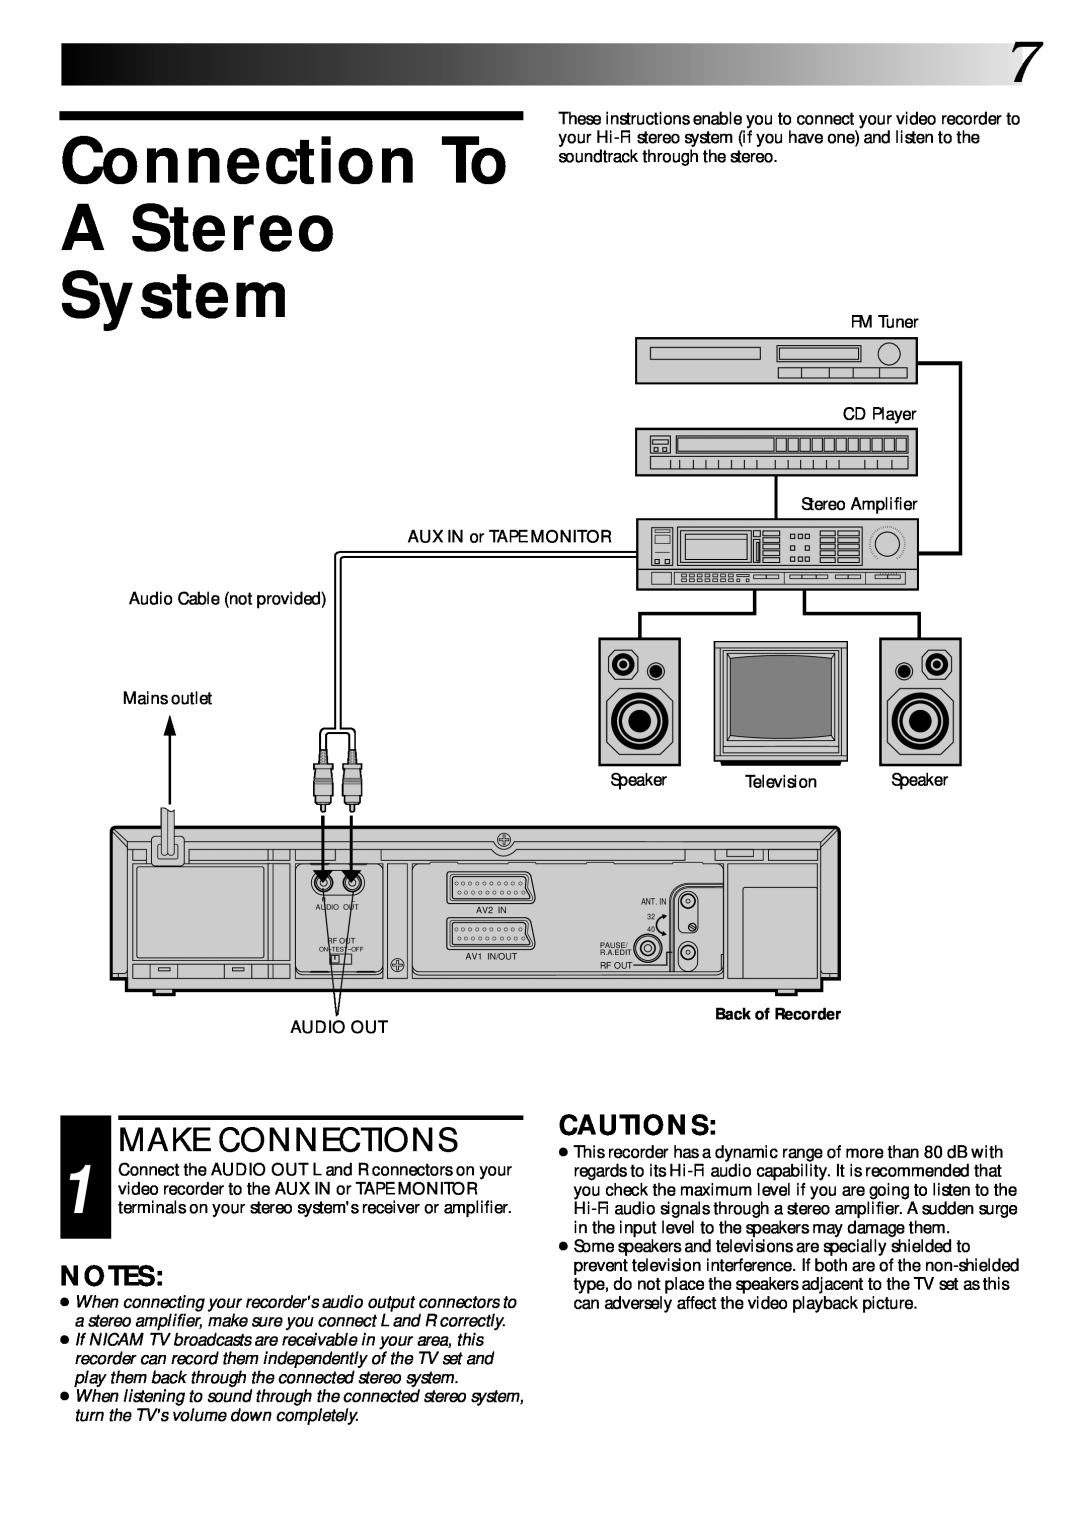 JVC PU30425 specifications Connection To A Stereo System, Make Connections, Cautions, Back of Recorder 